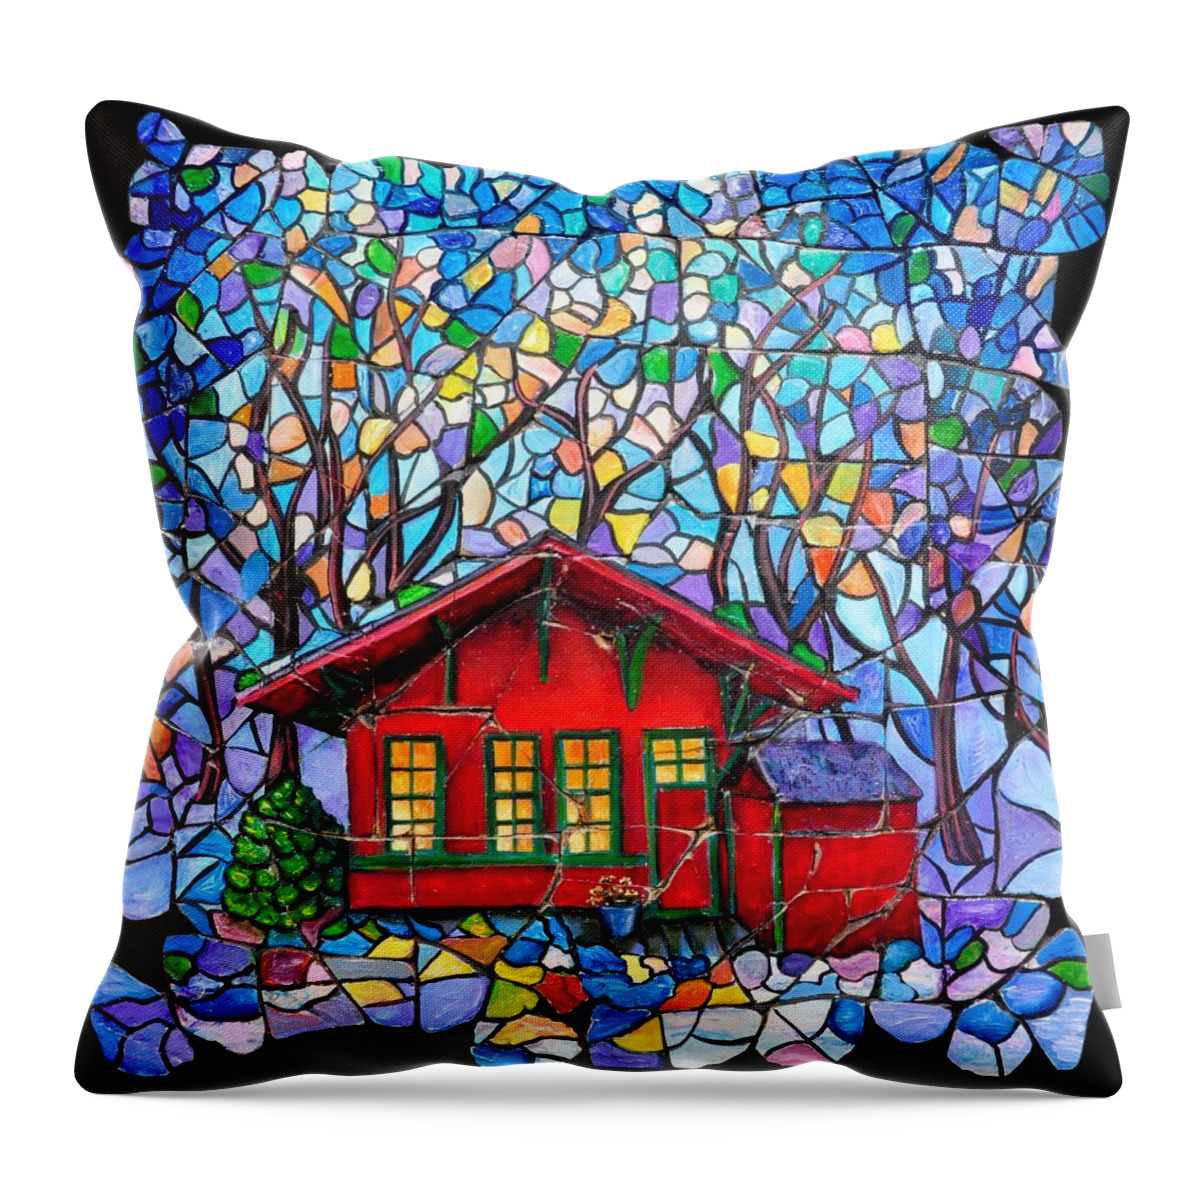 Art Depot Throw Pillow featuring the painting Art Depot by Lena Owens - OLena Art Vibrant Palette Knife and Graphic Design